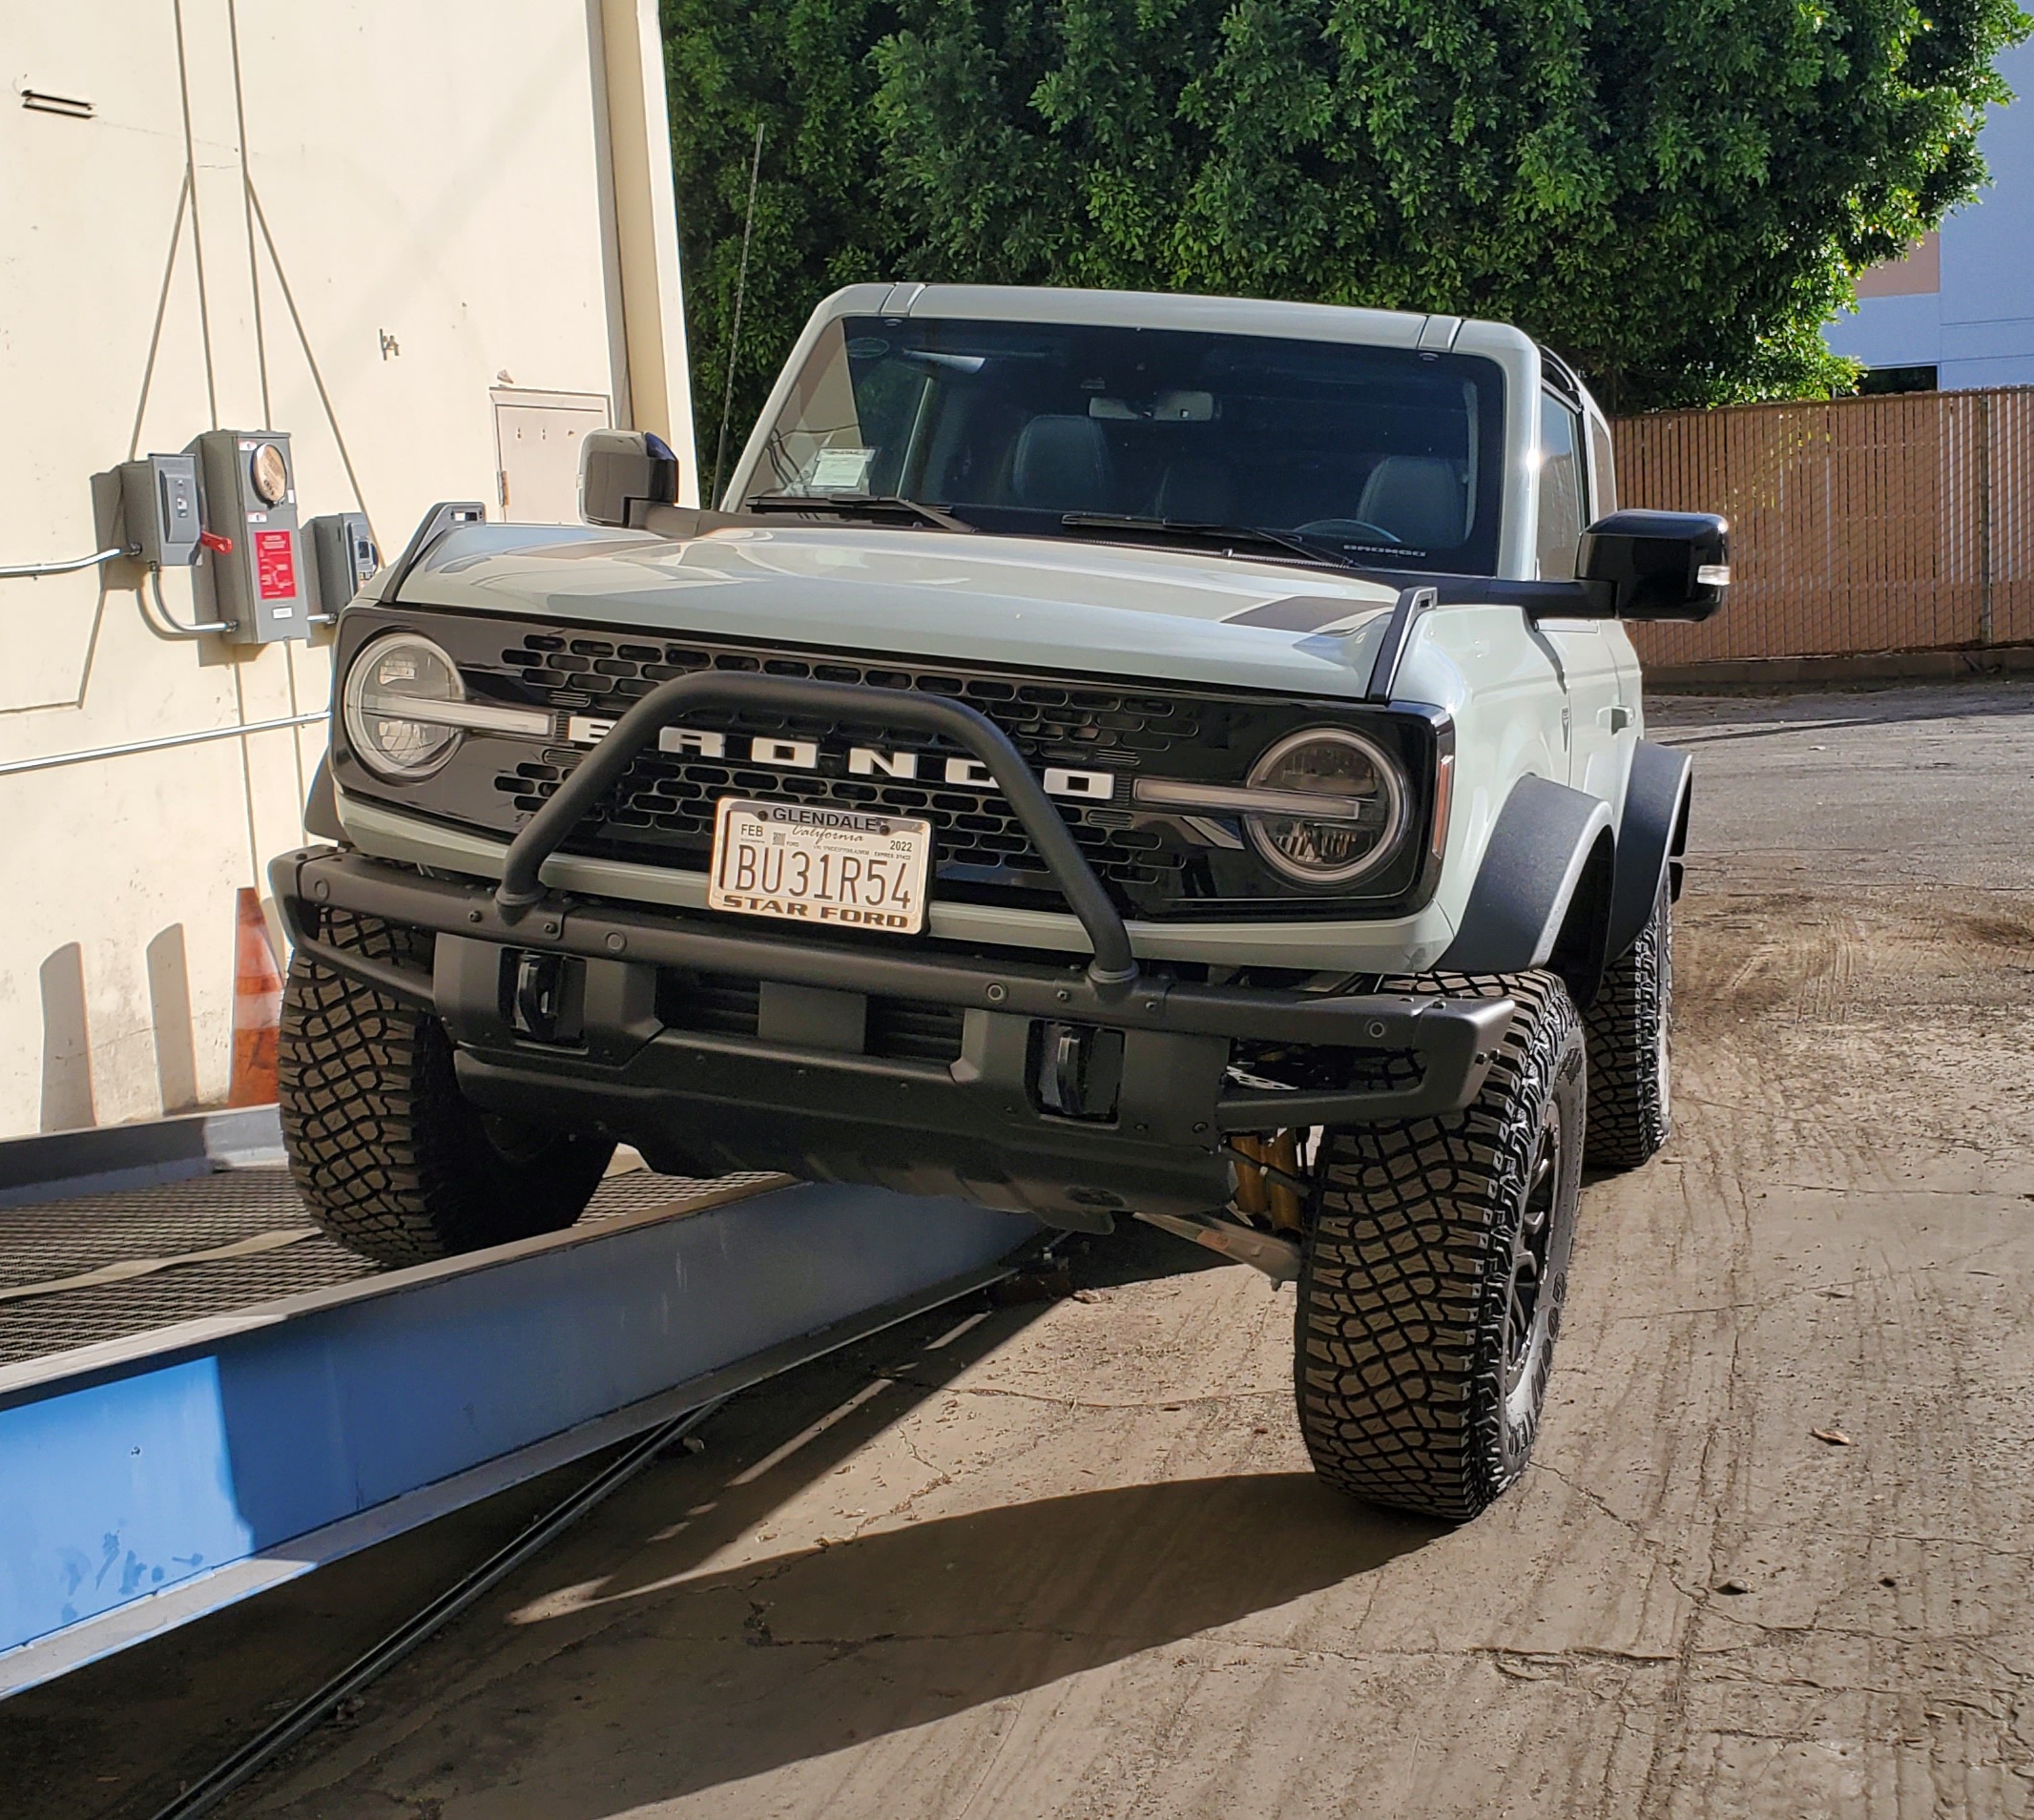 Ford Bronco Before & After Photos. Let's See Your Bronco! 20211126_145108